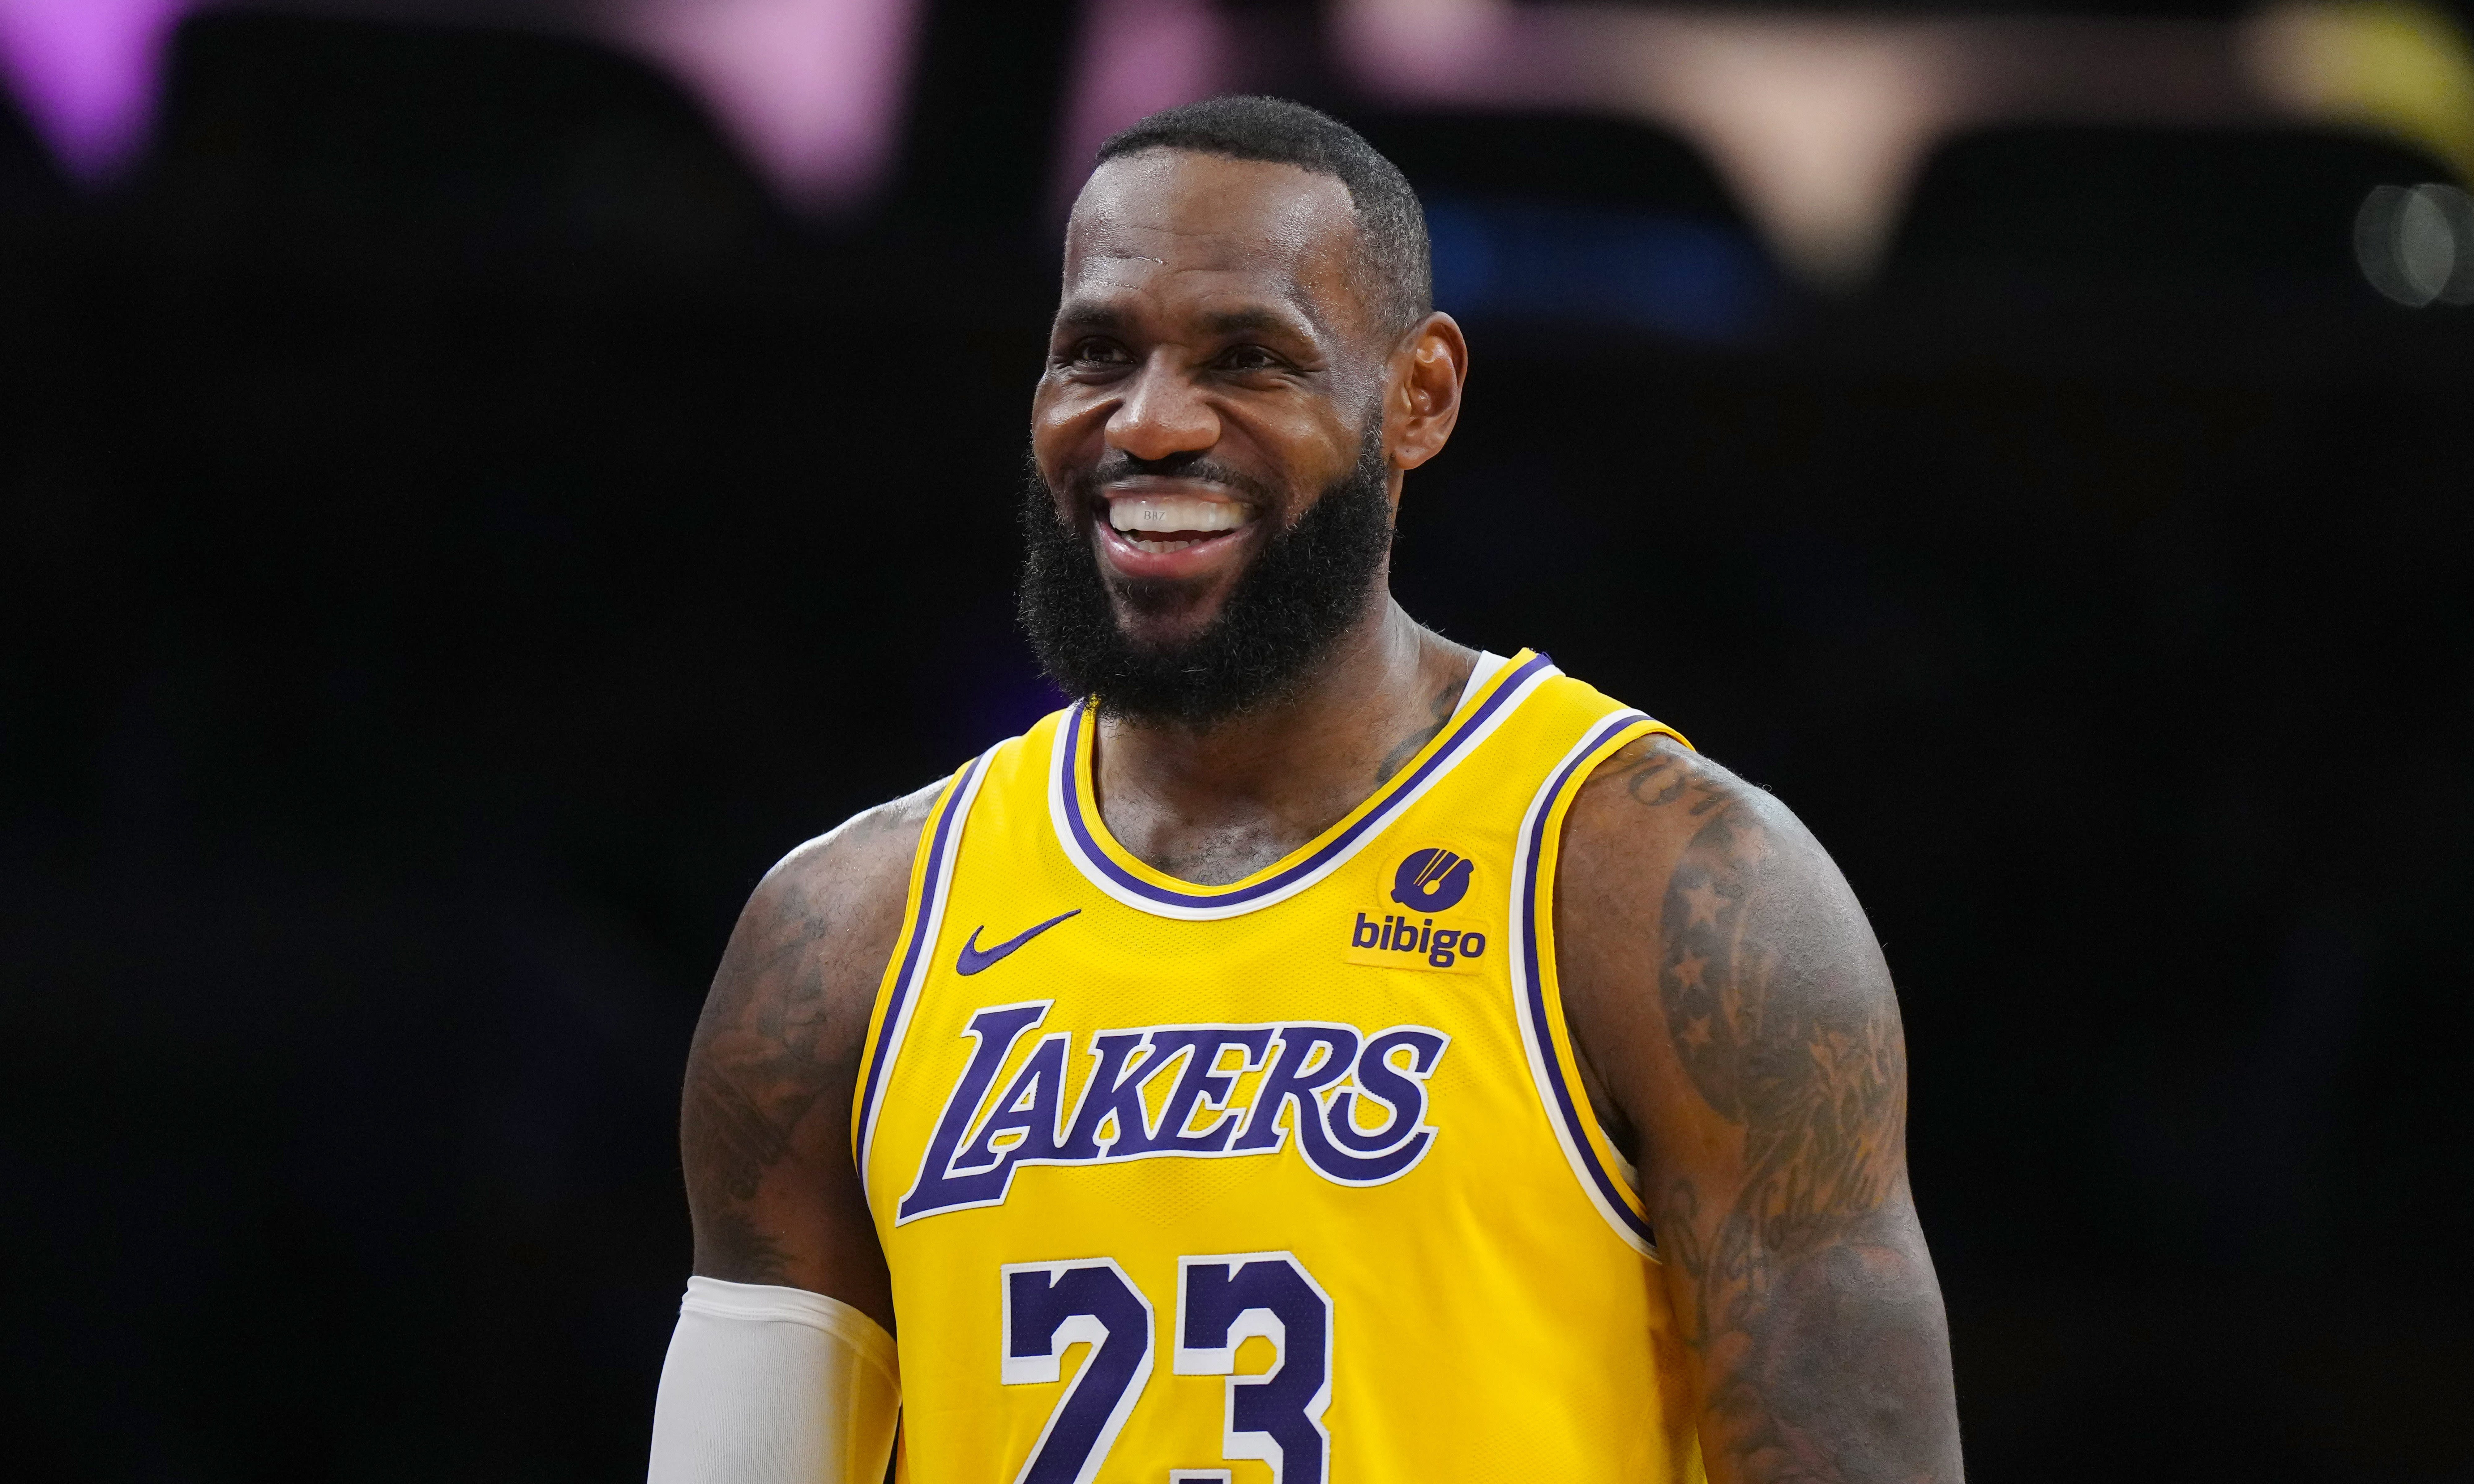 LeBron James becomes oldest player to be named to an All-NBA team